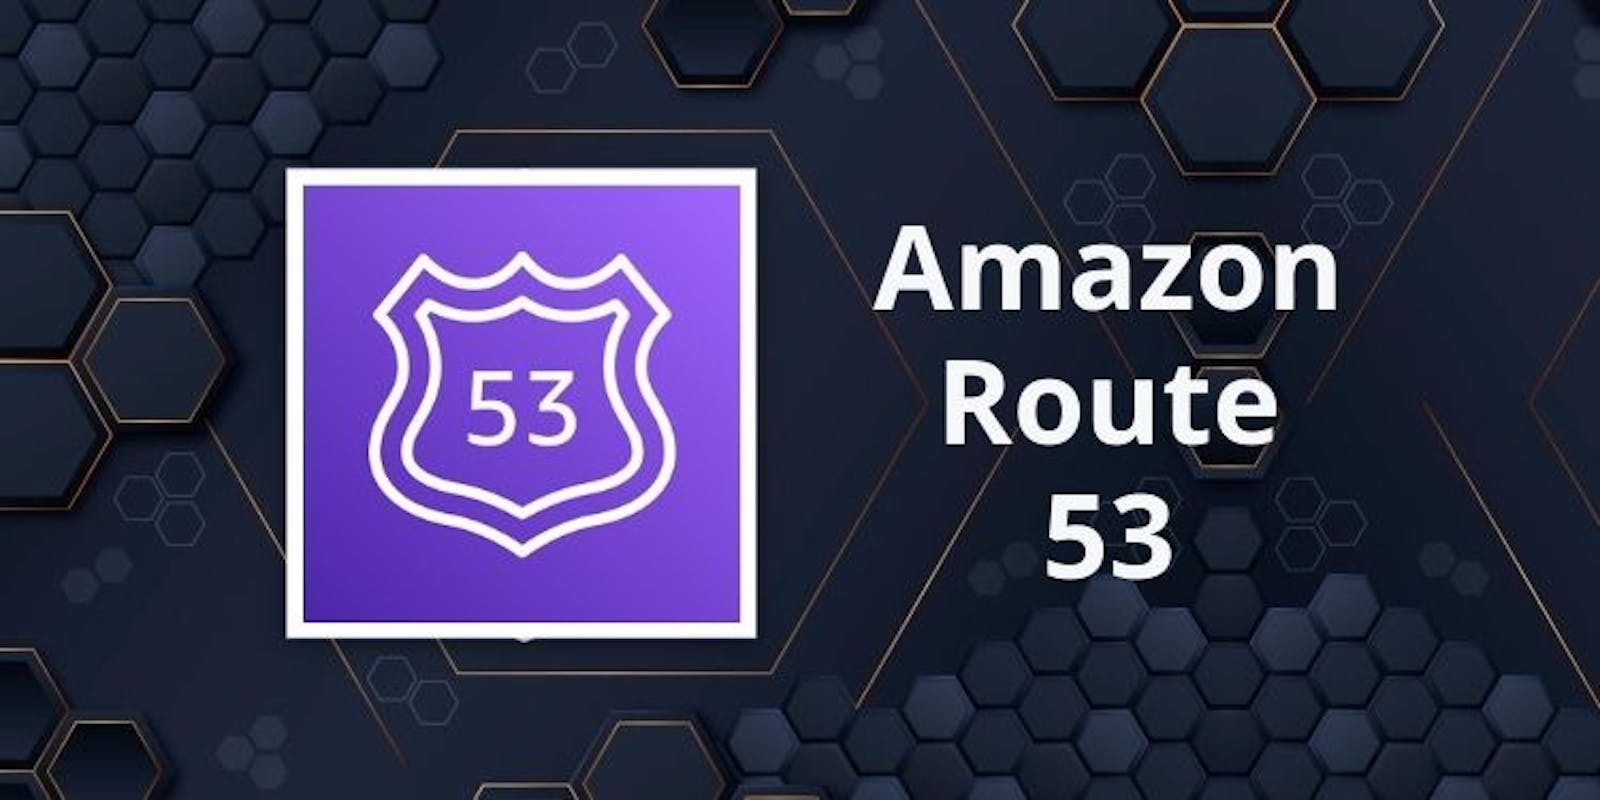 How to Implement AWS Route 53 for Your Domain: A Step-by-Step Guide